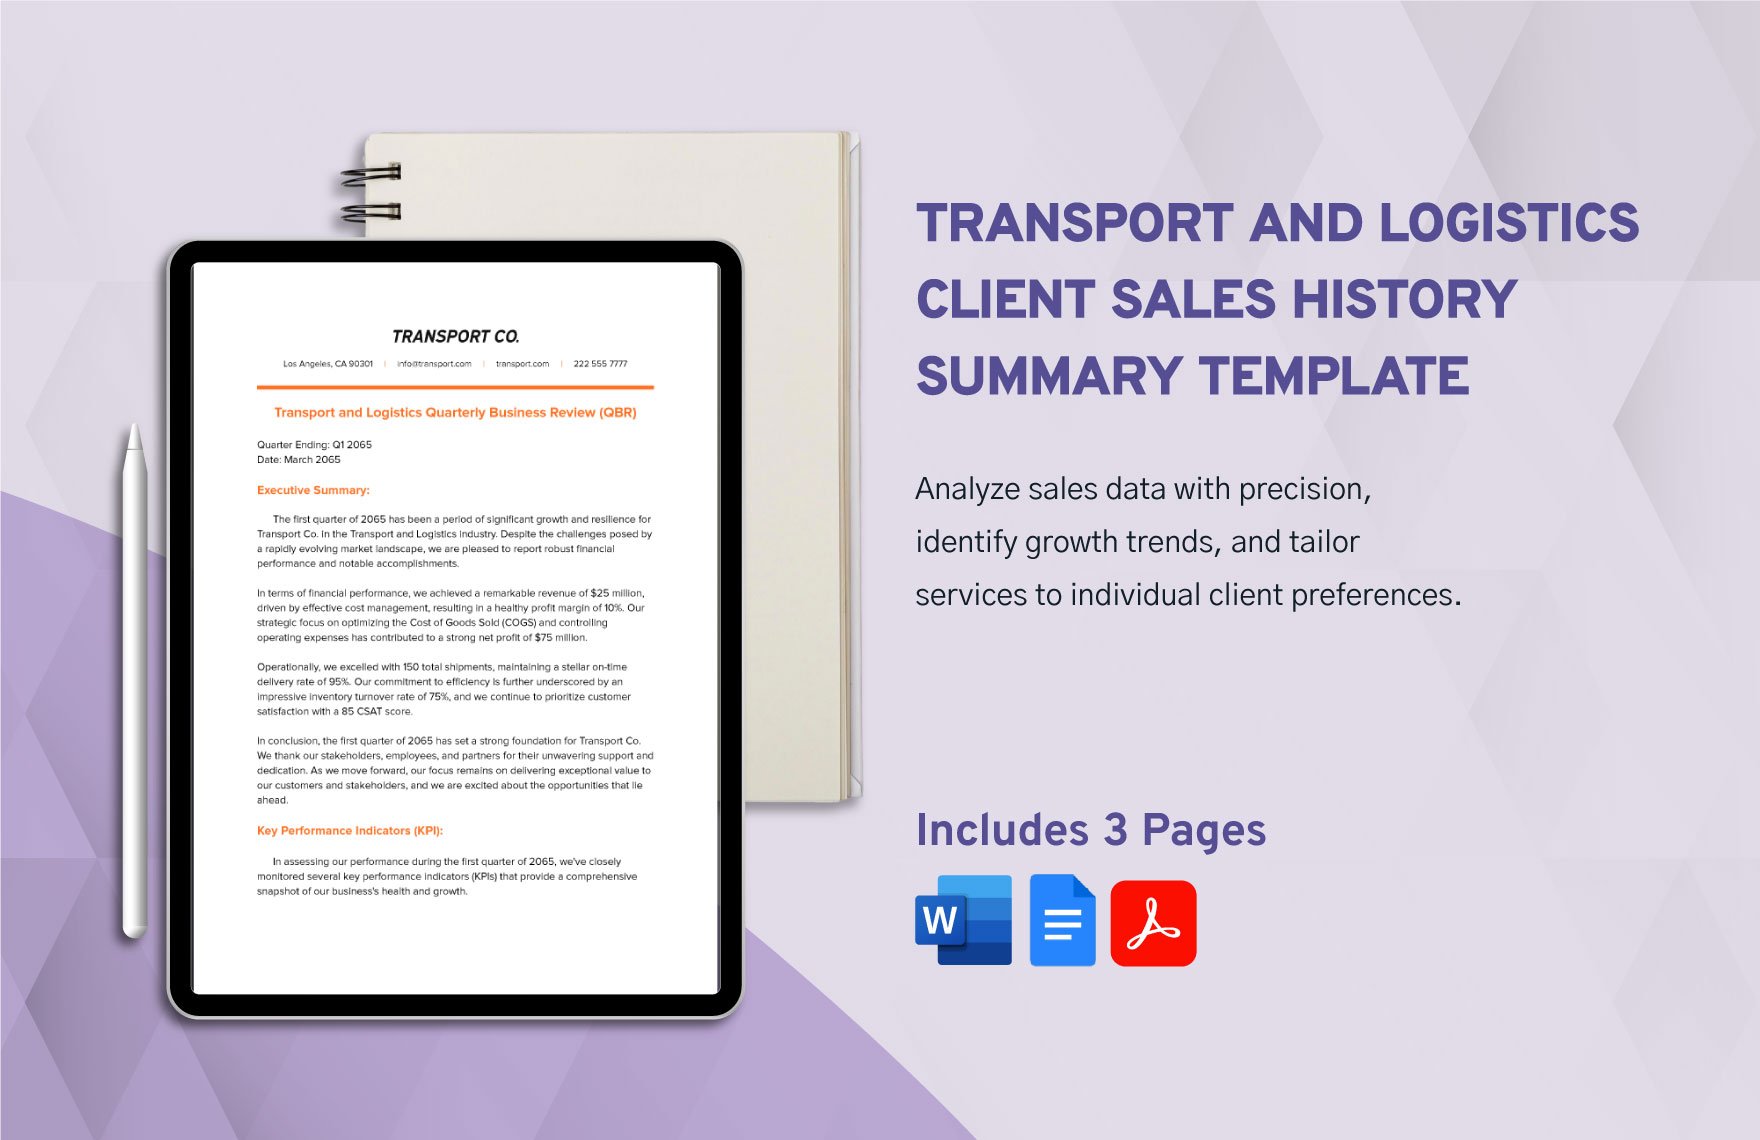 Transport and Logistics Client Sales History Summary Template